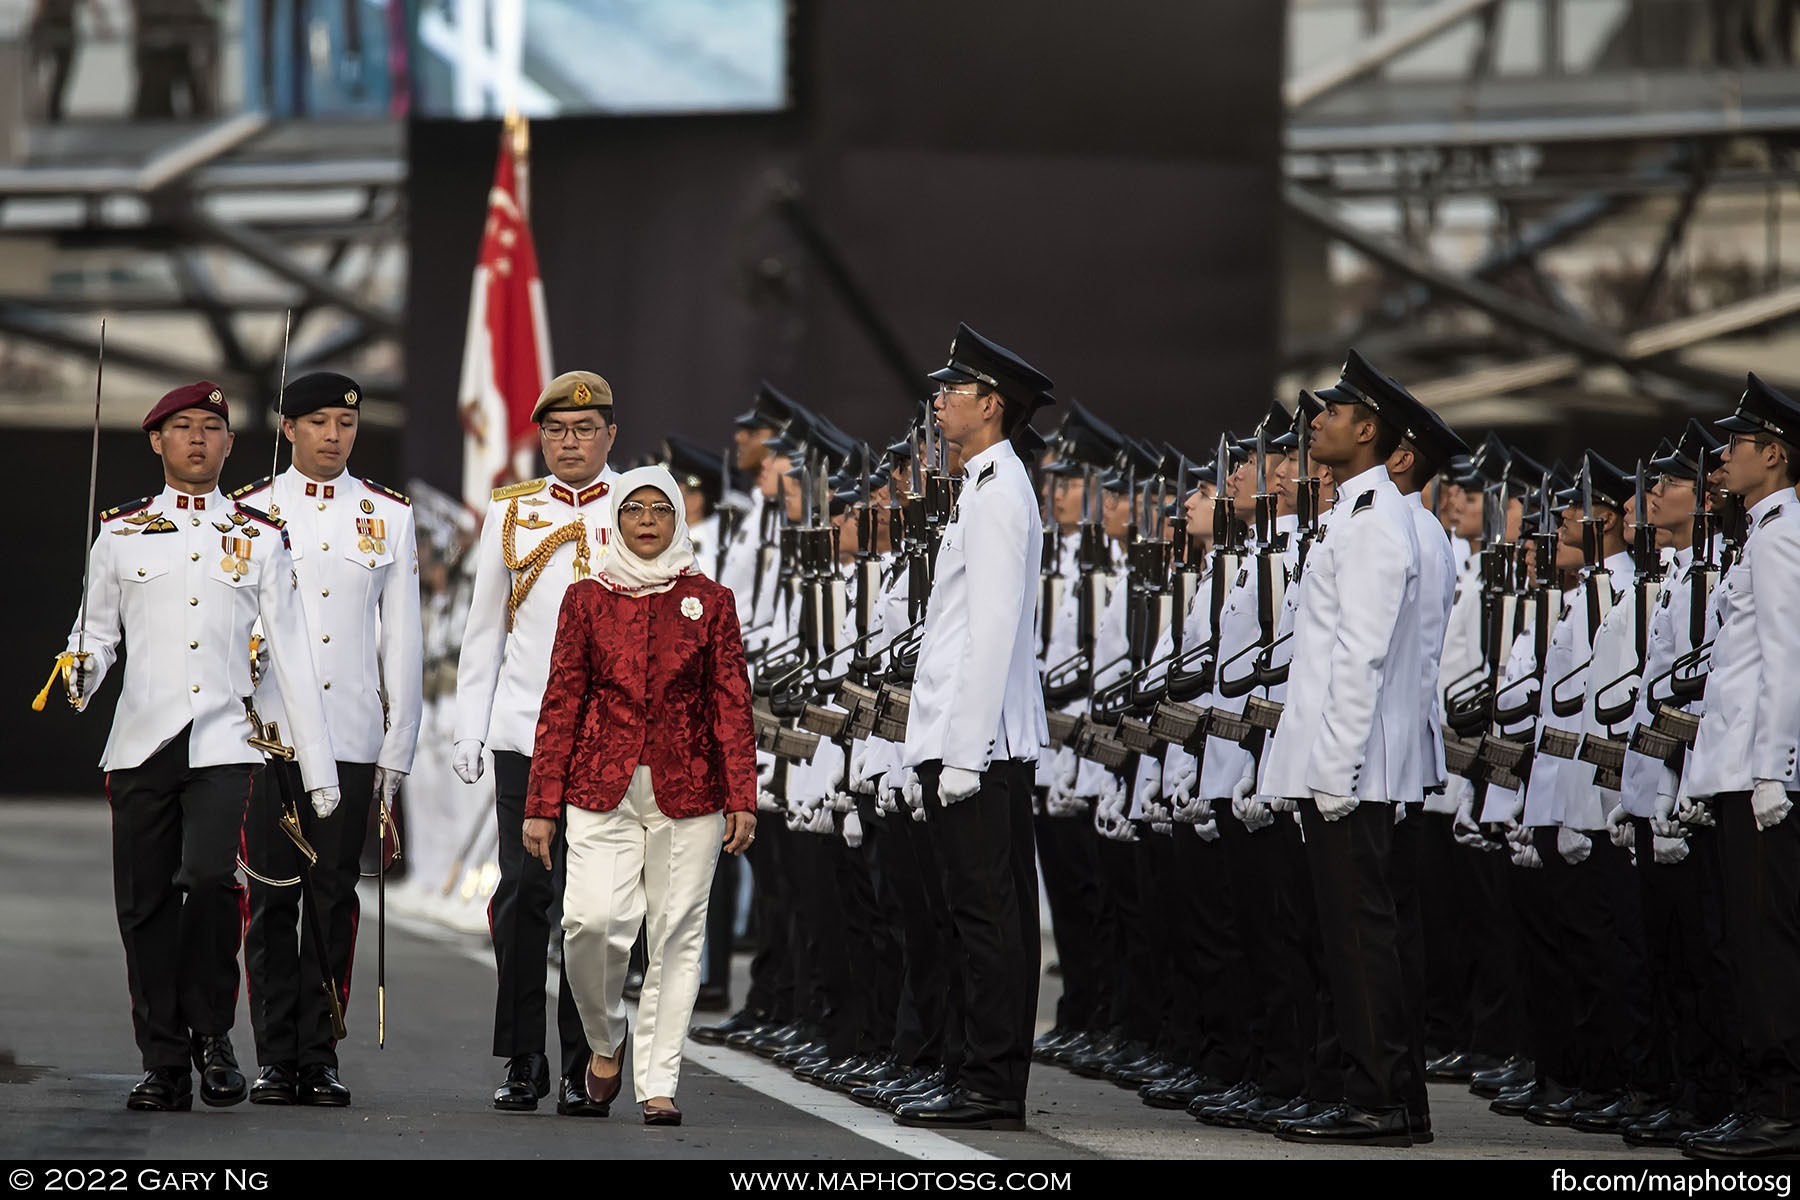 President Halimah Yacob inspects the Guard of Honor